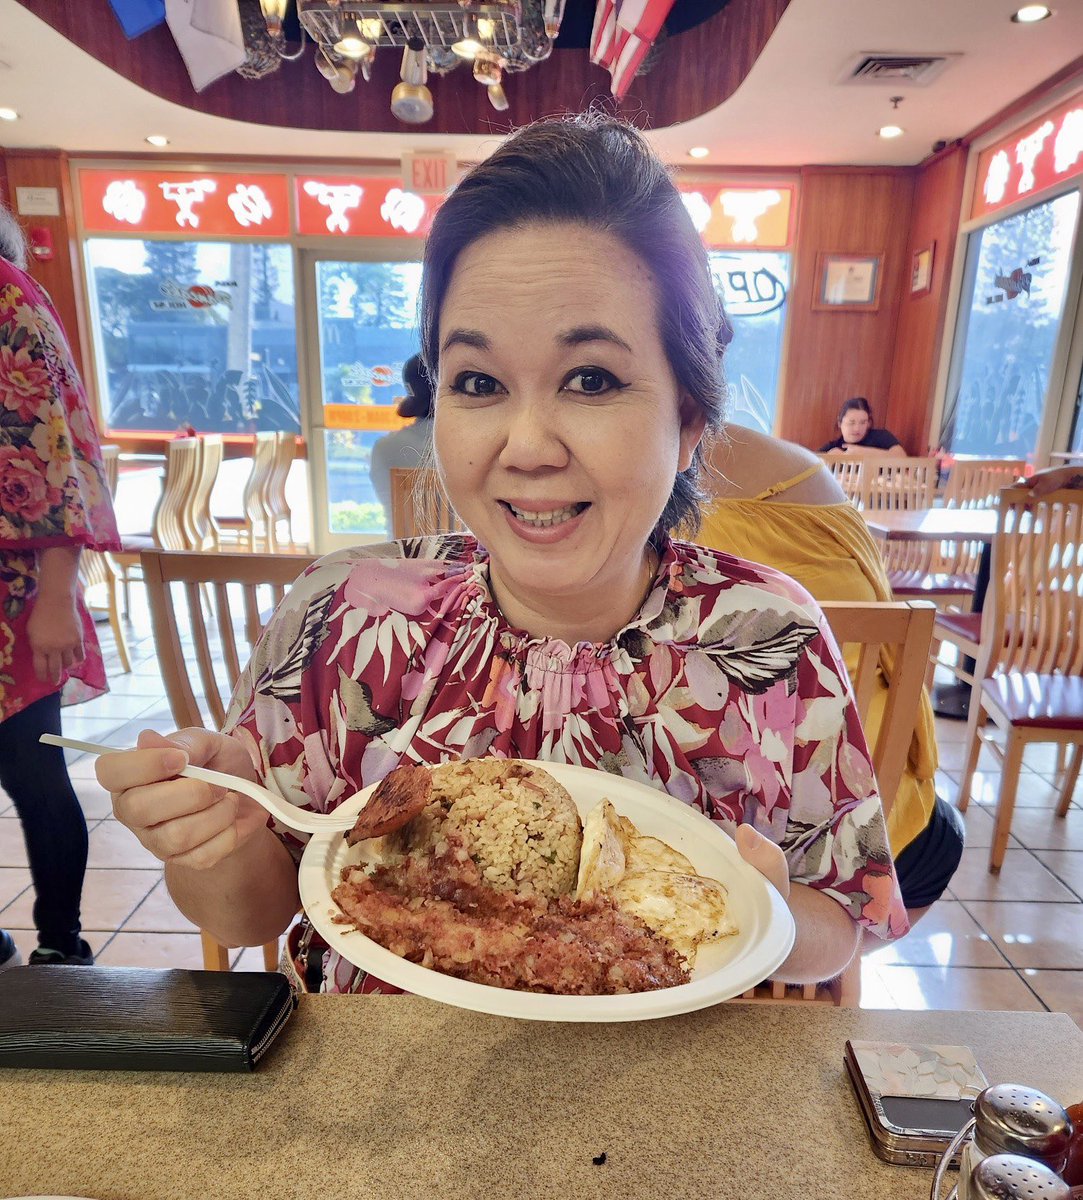 Living in Hawaiʻi means that you’re always surrounded by ono food! I started my day with fried rice, corned beef hash, Portuguese sausage, and eggs! #onolicious #onogrinds #luckywelivehawaii